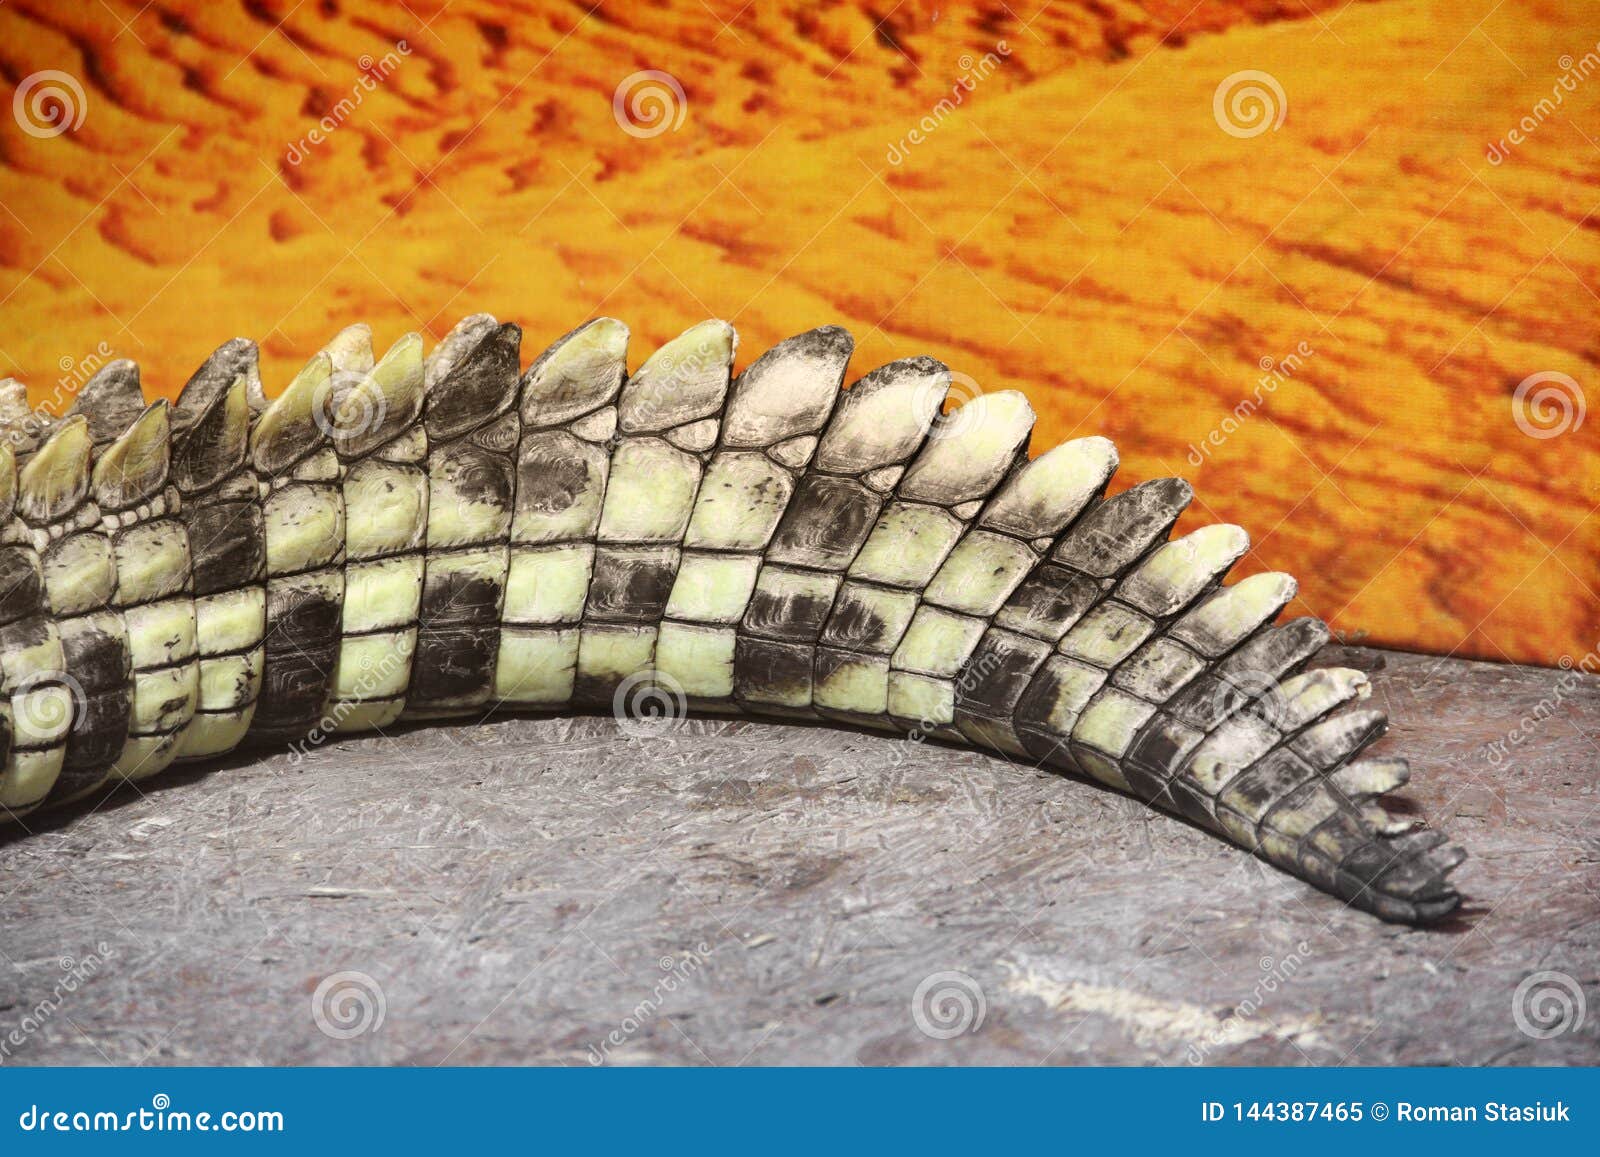 Crocodile tail close up stock image. Image of open, asian - 144387465